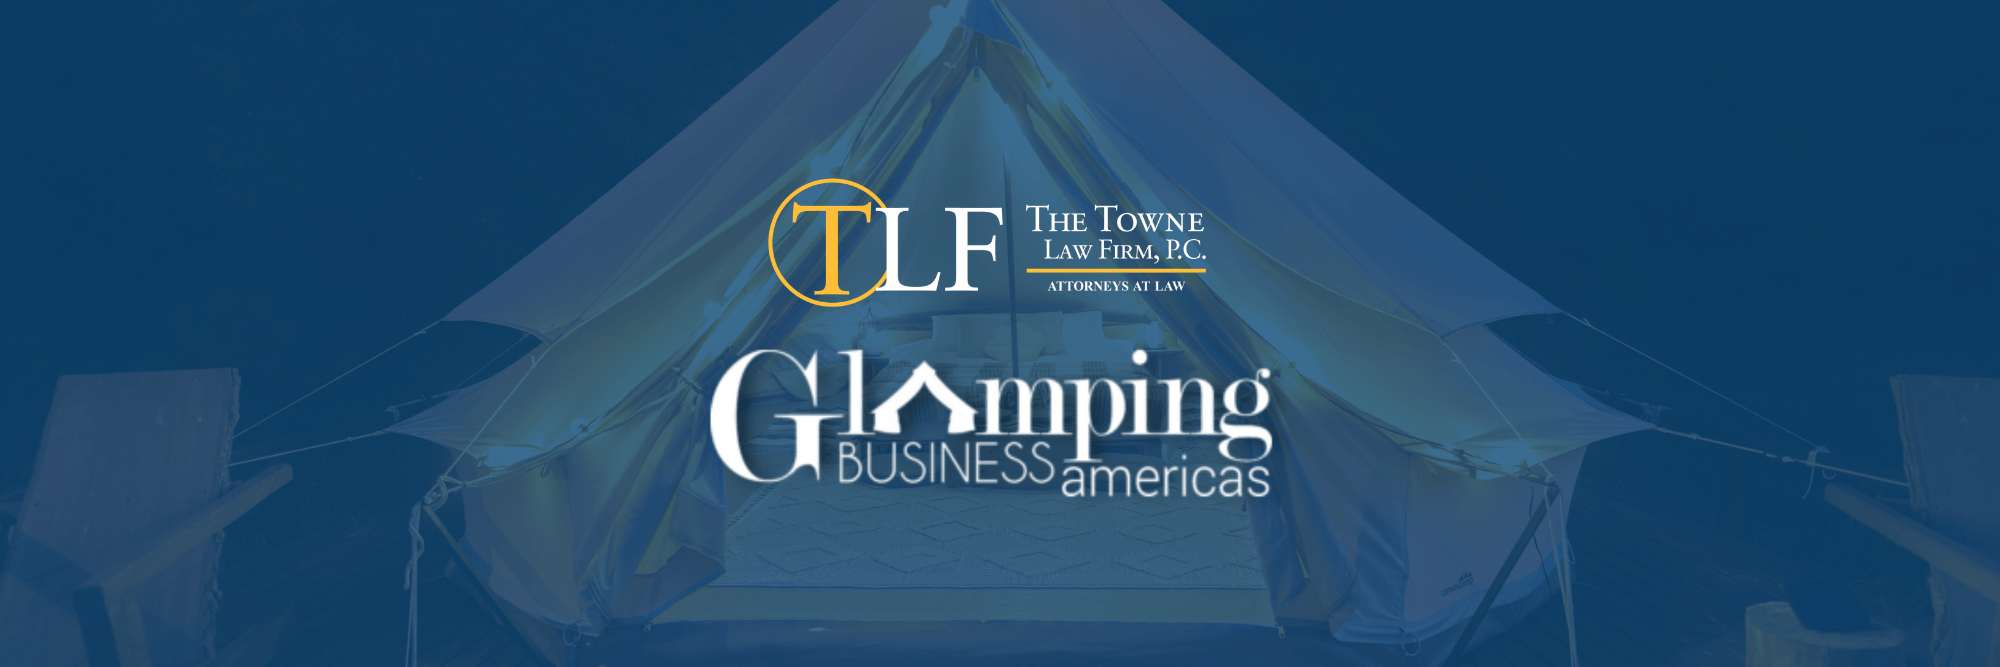 Banner blog image - glamping tent with The Towne Law Firm and Glamping Business Americas Logos